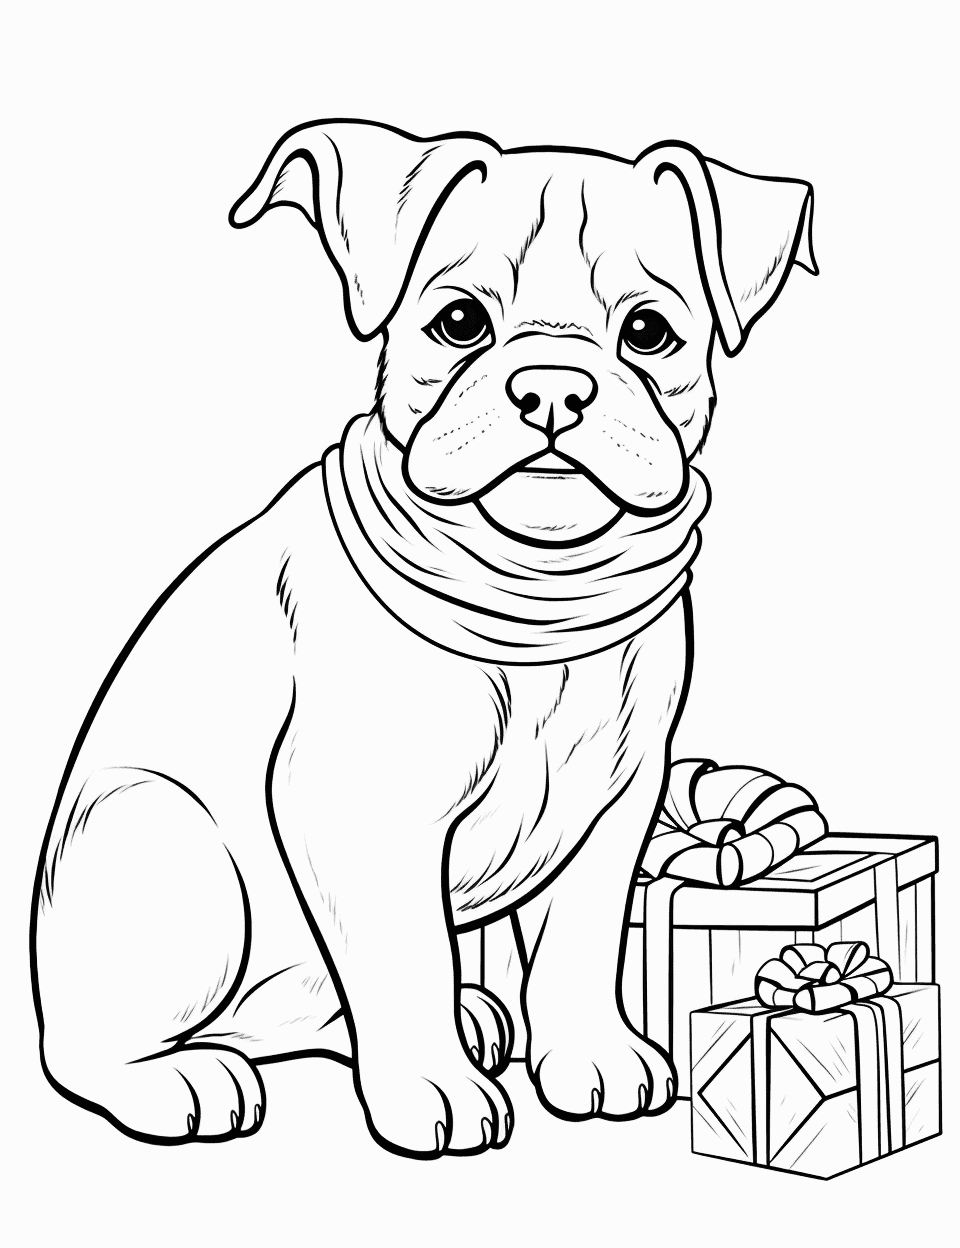 Holiday Special Christmas Bulldog Puppy Coloring Page - A bulldog puppy with a big red bow around its neck sitting next to a pile of Christmas presents.